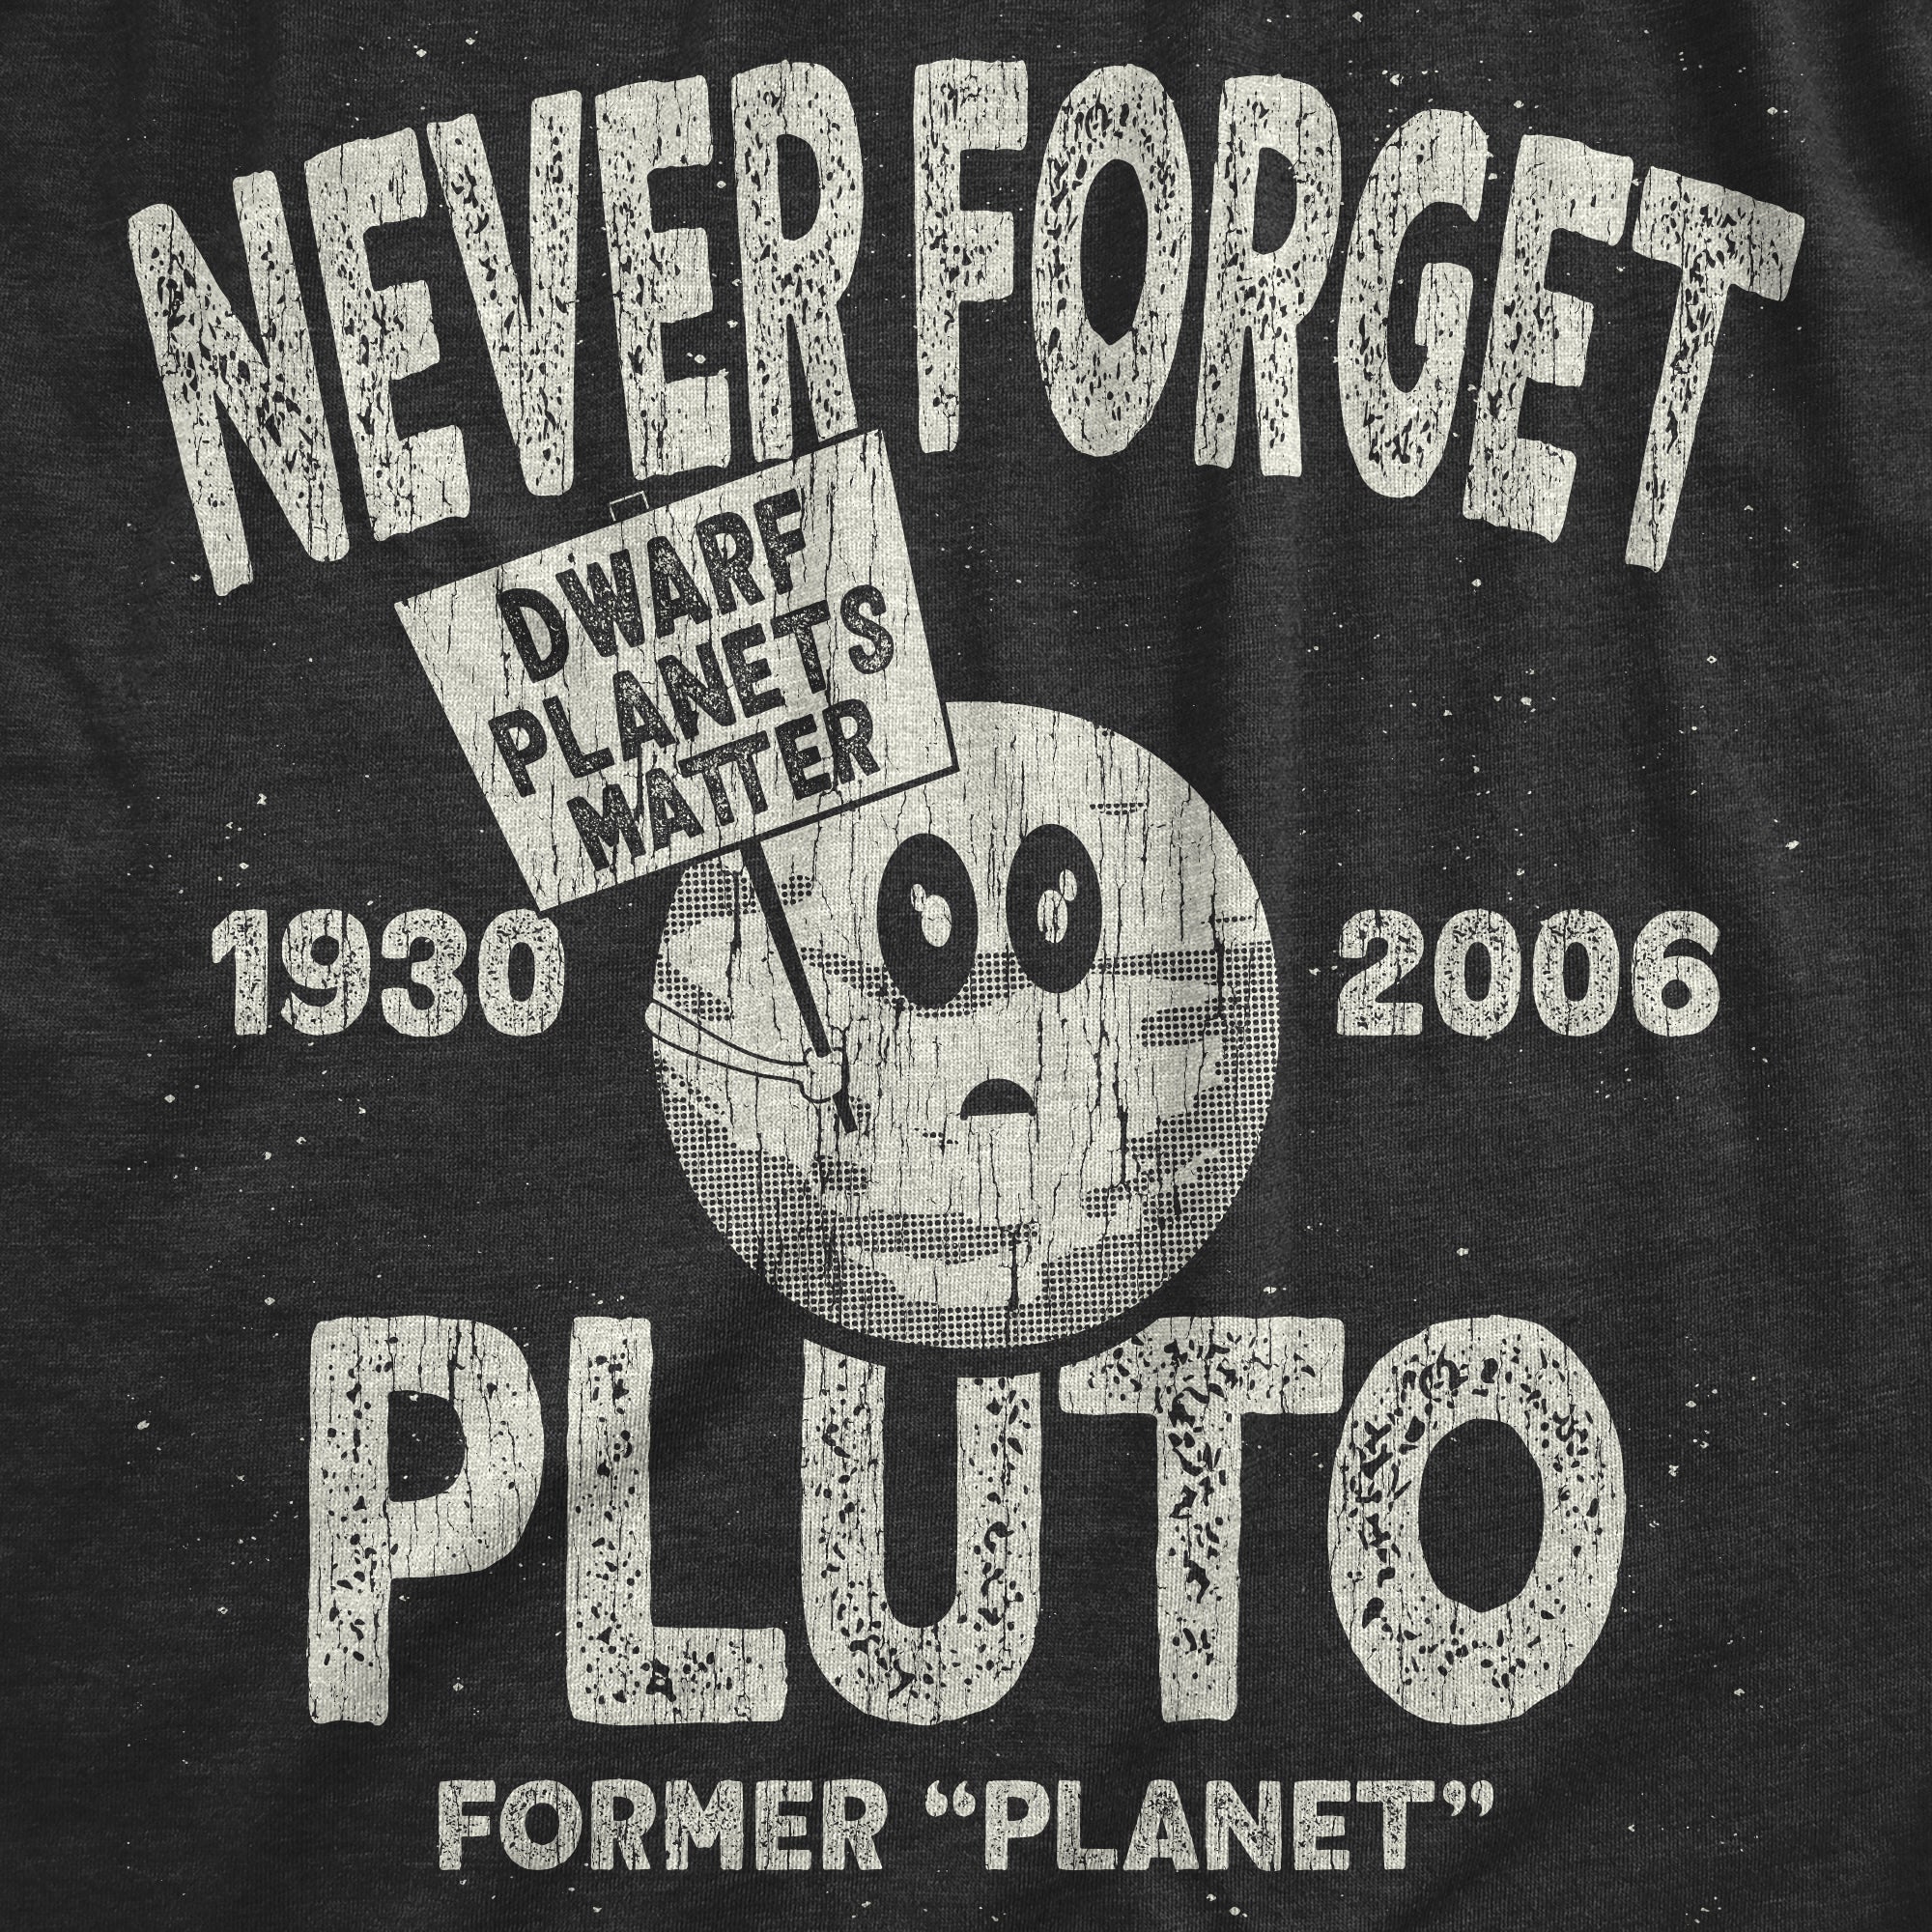 Funny Heather Black - PLUTO Never Forget Pluto Womens T Shirt Nerdy Space Tee